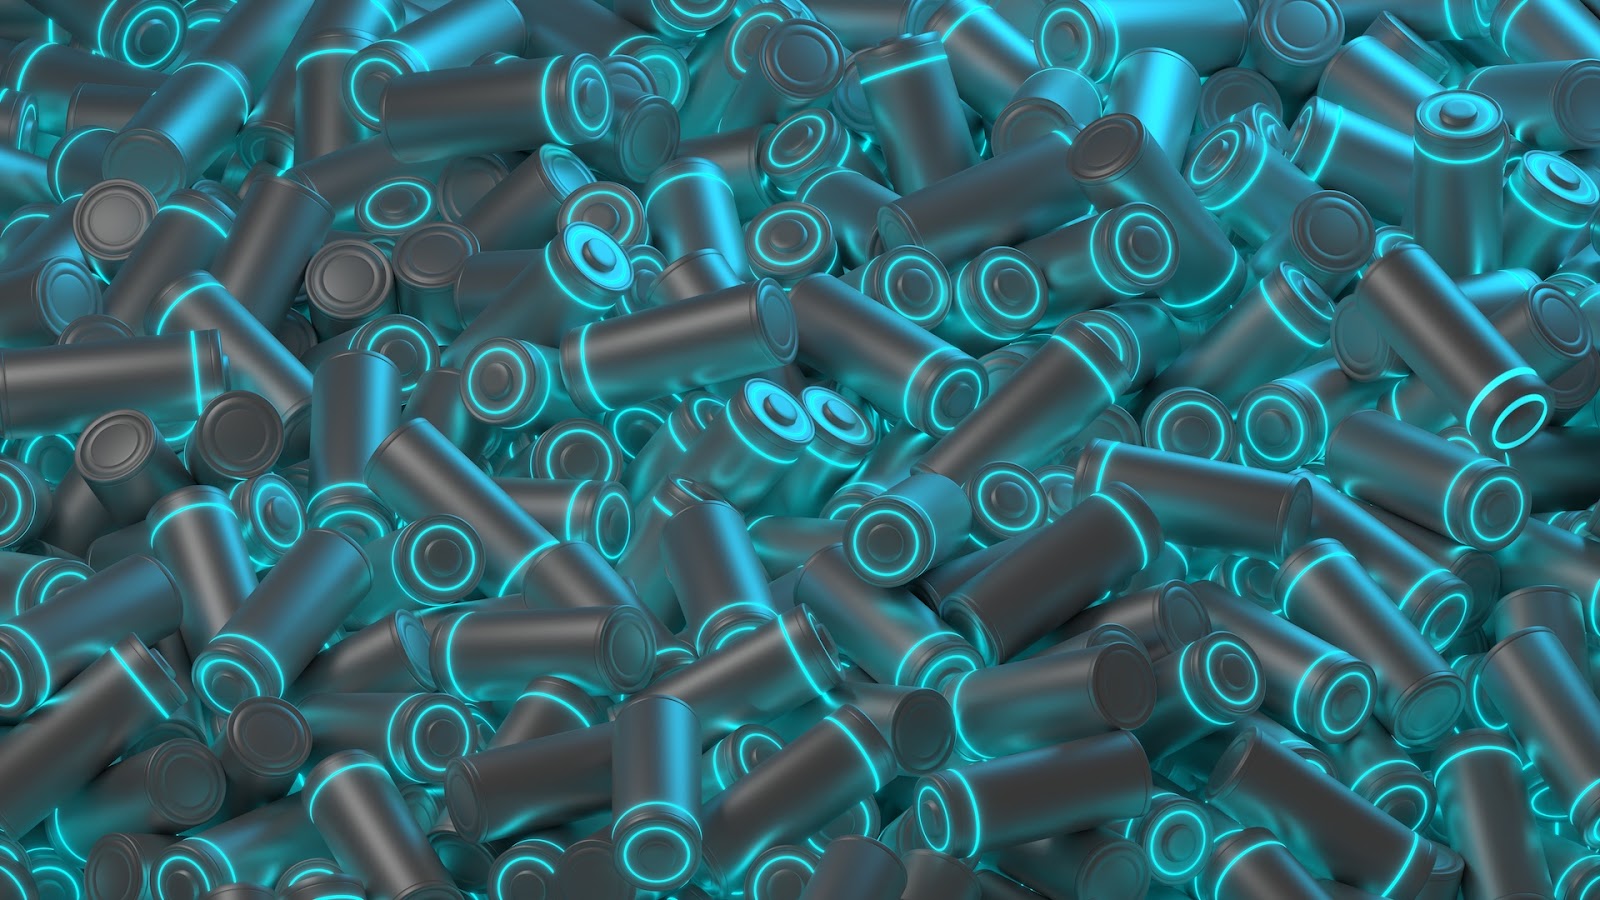 Lithium battery concept. Image used courtesy of Adobe Stock